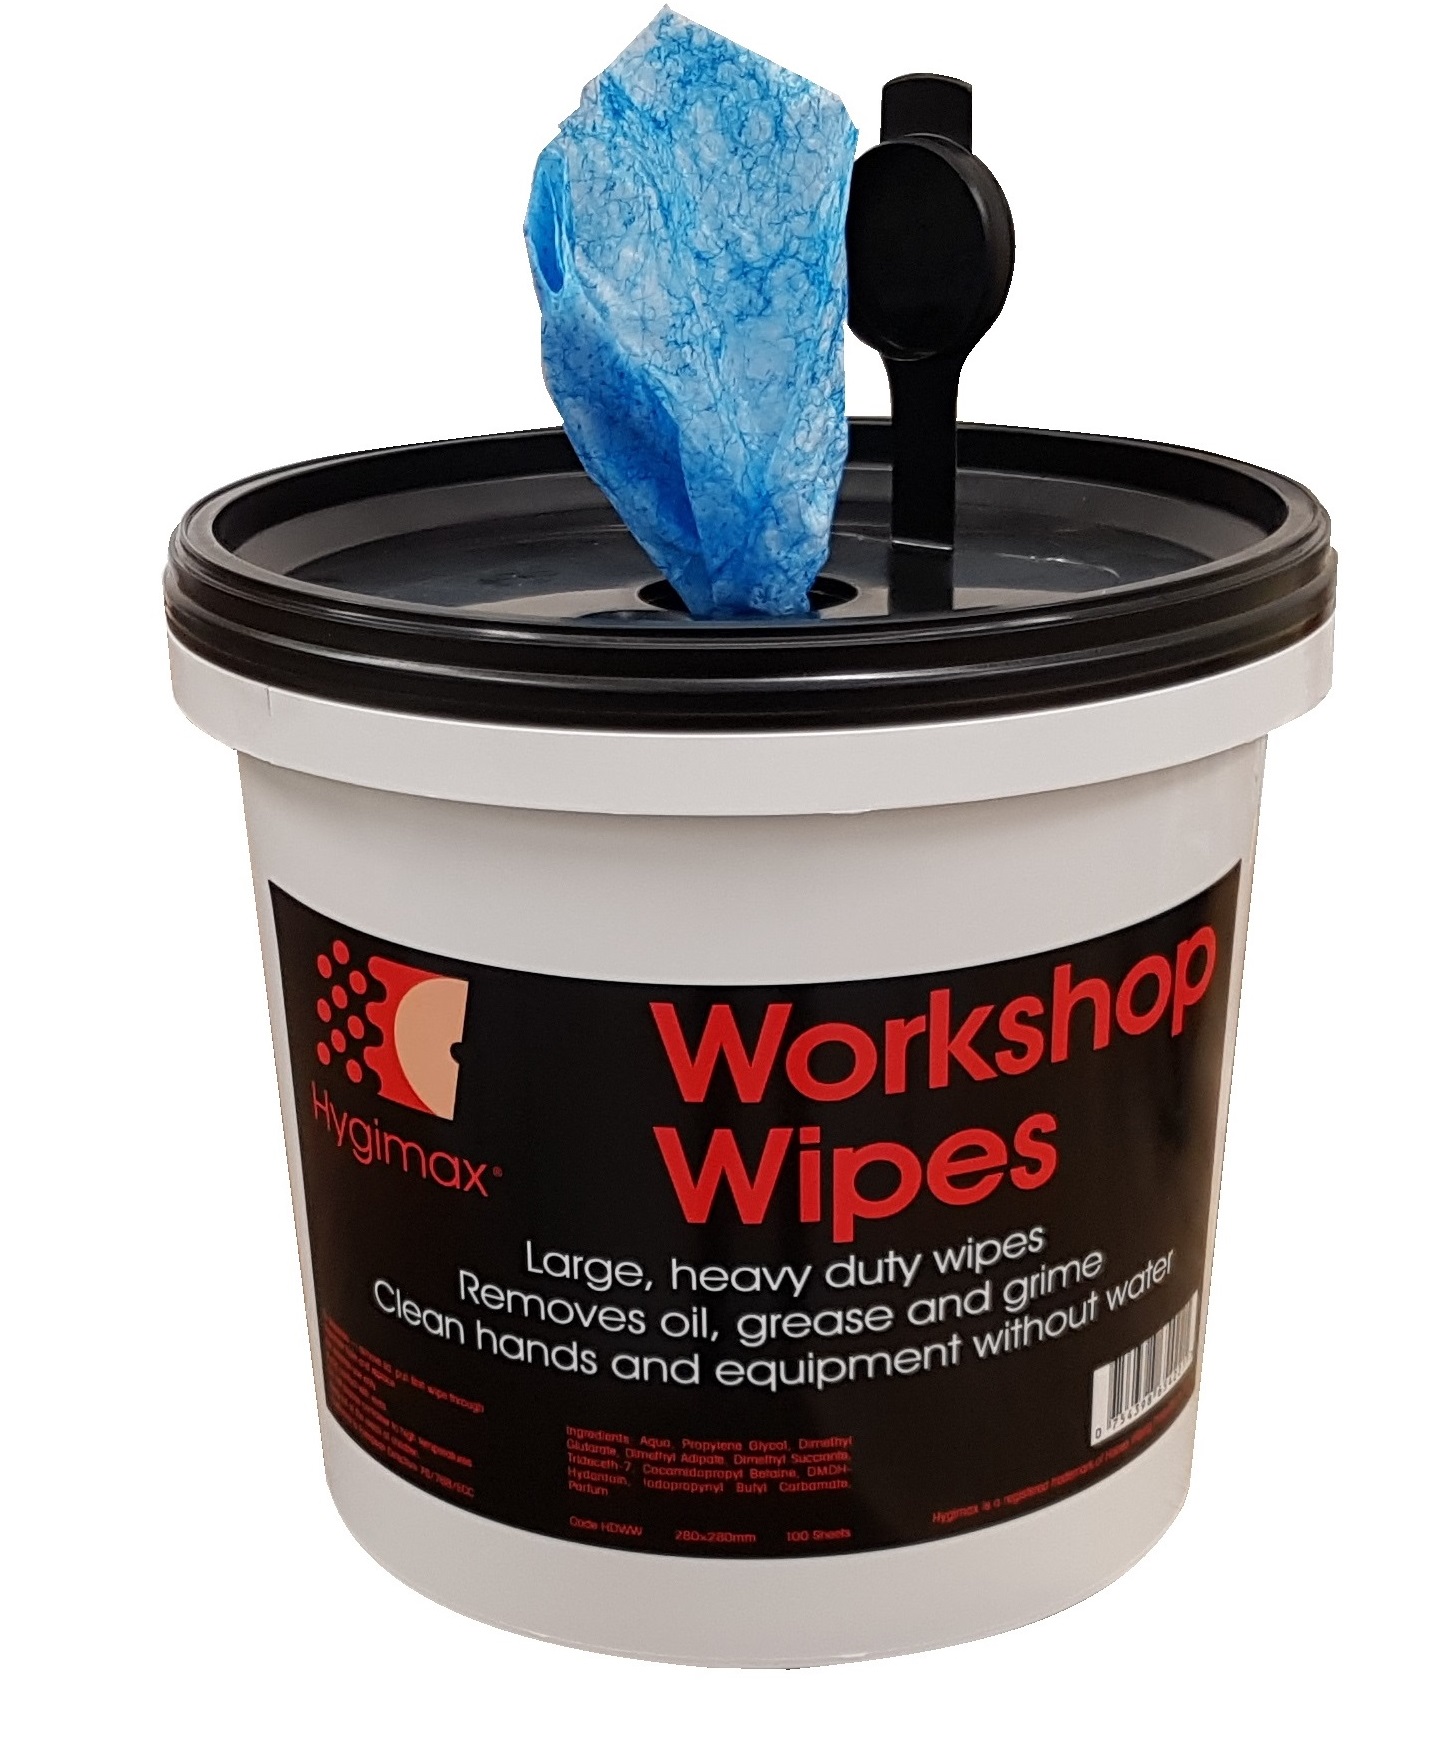 HYGIMAX  Workshop Wipes for Hands and Surfaces Pack of 100